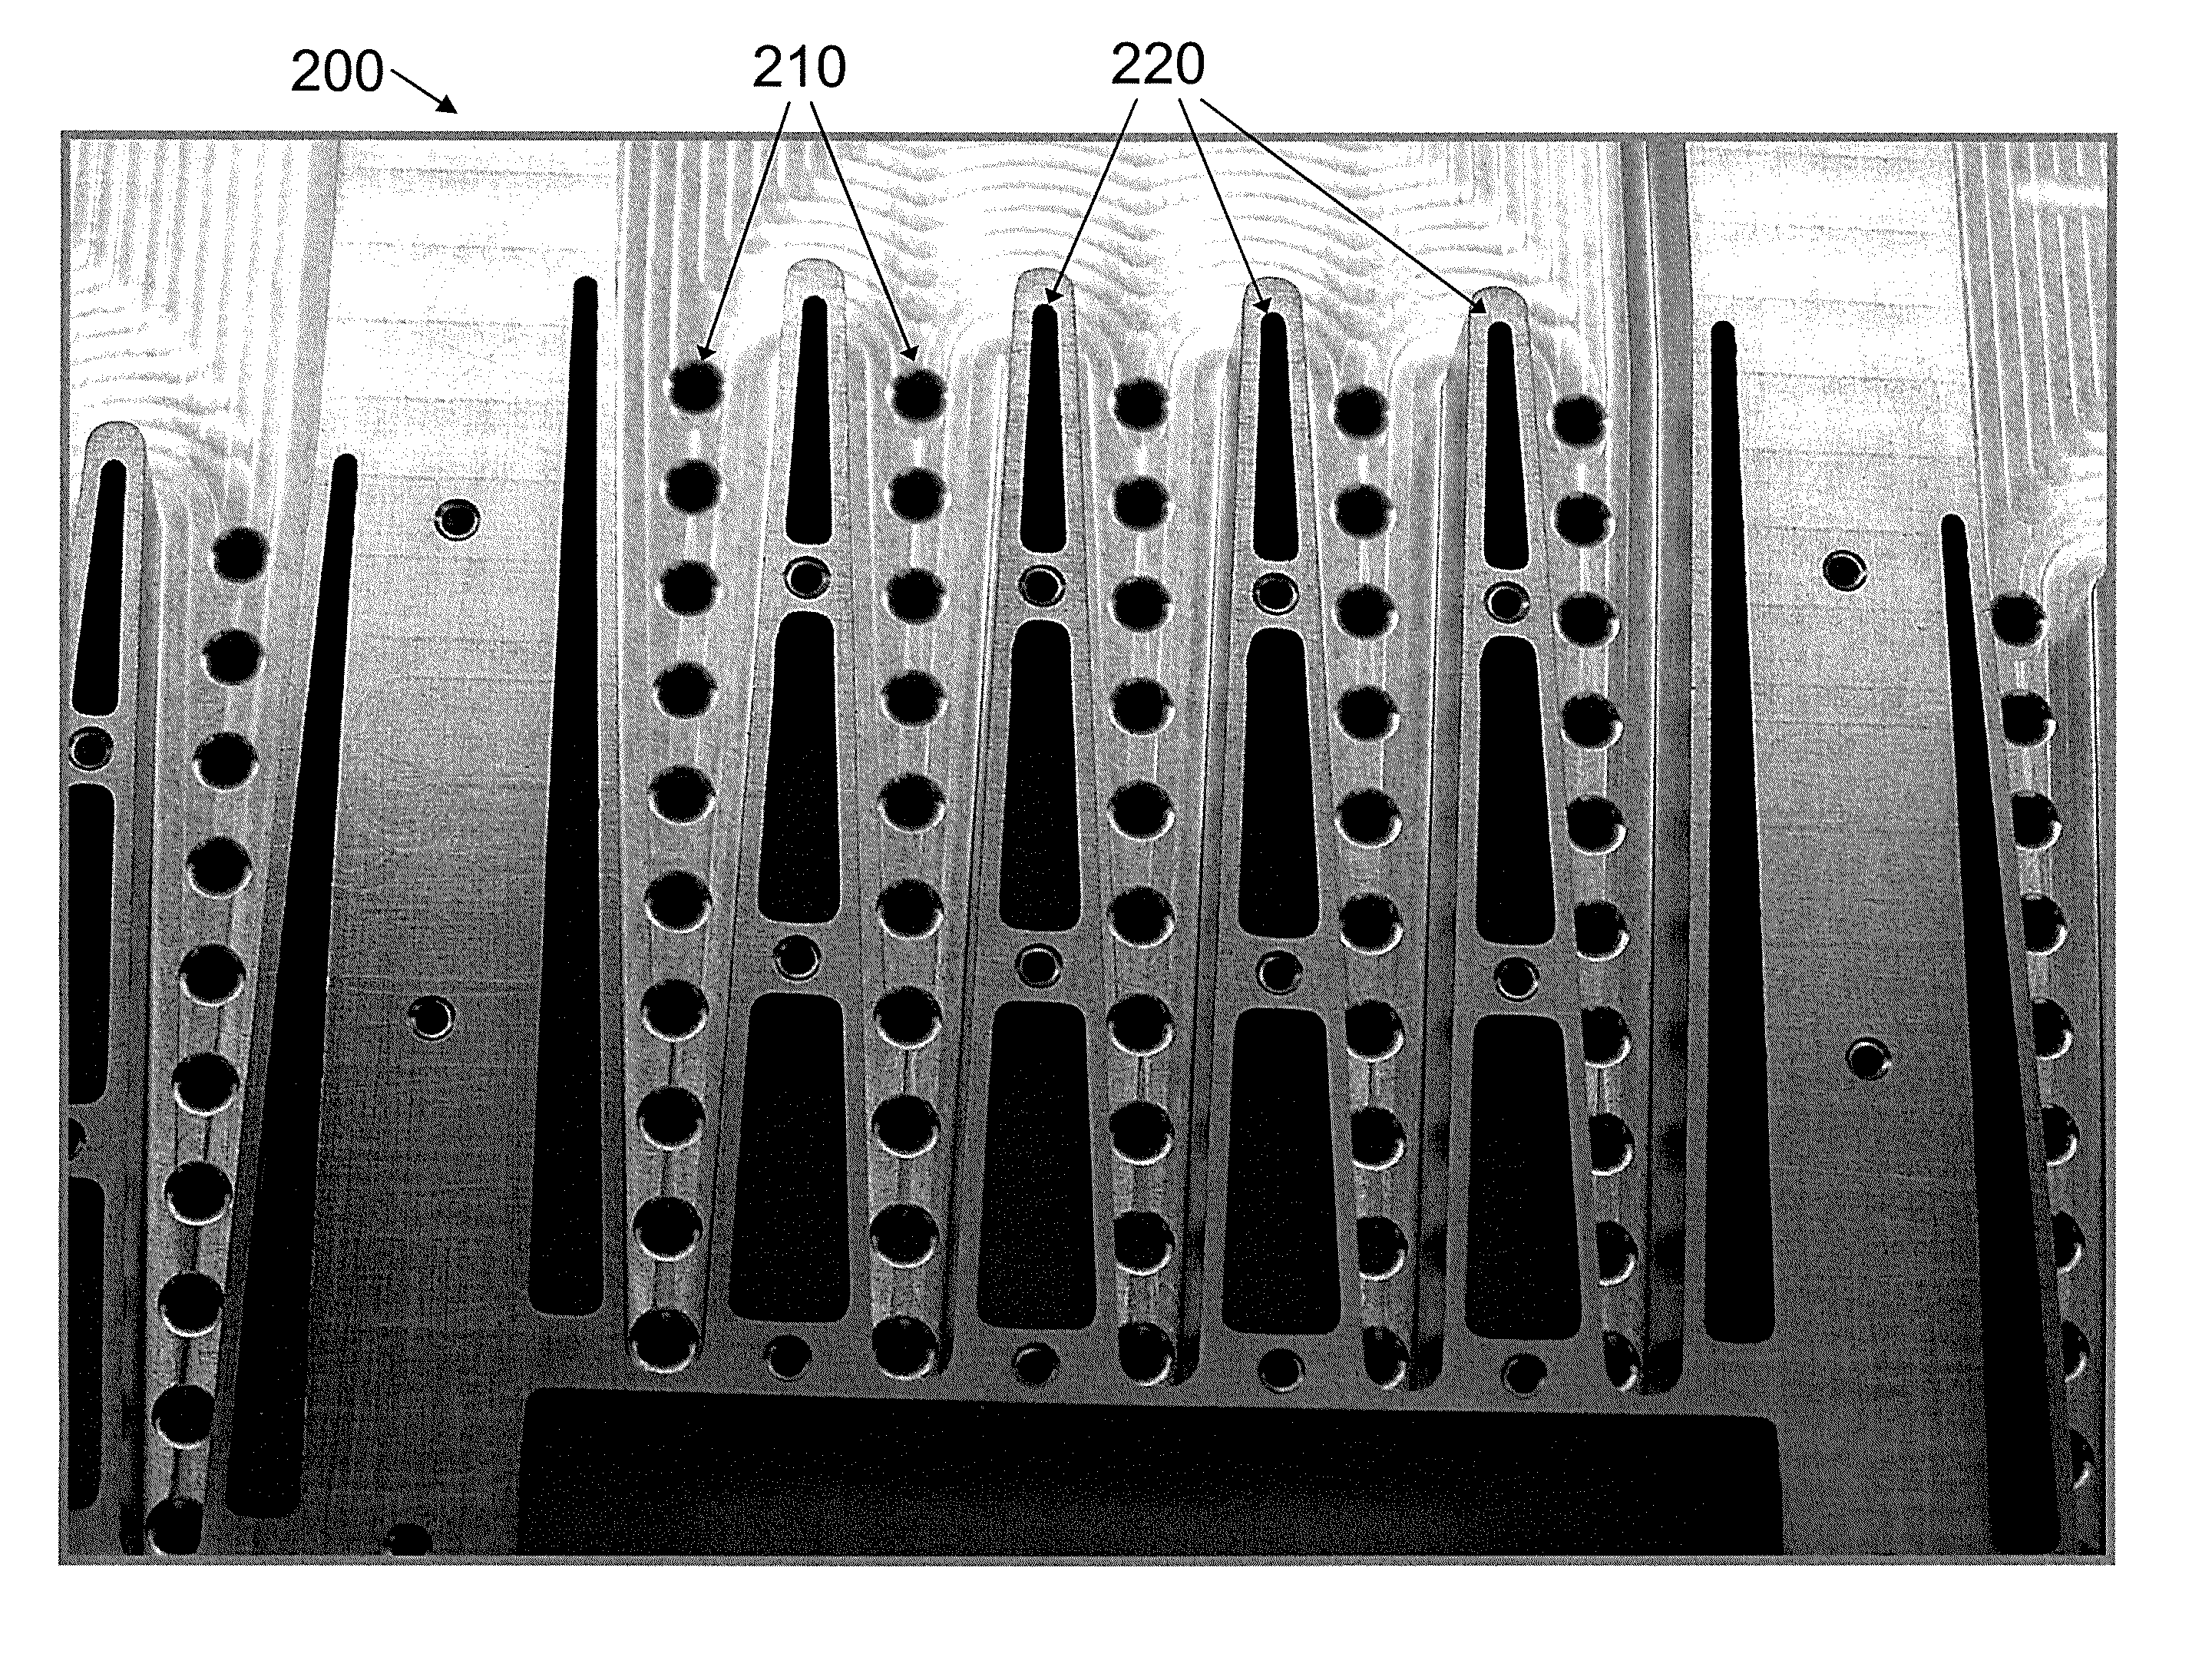 Architecture for gas cooled parallel microchannel array cooler